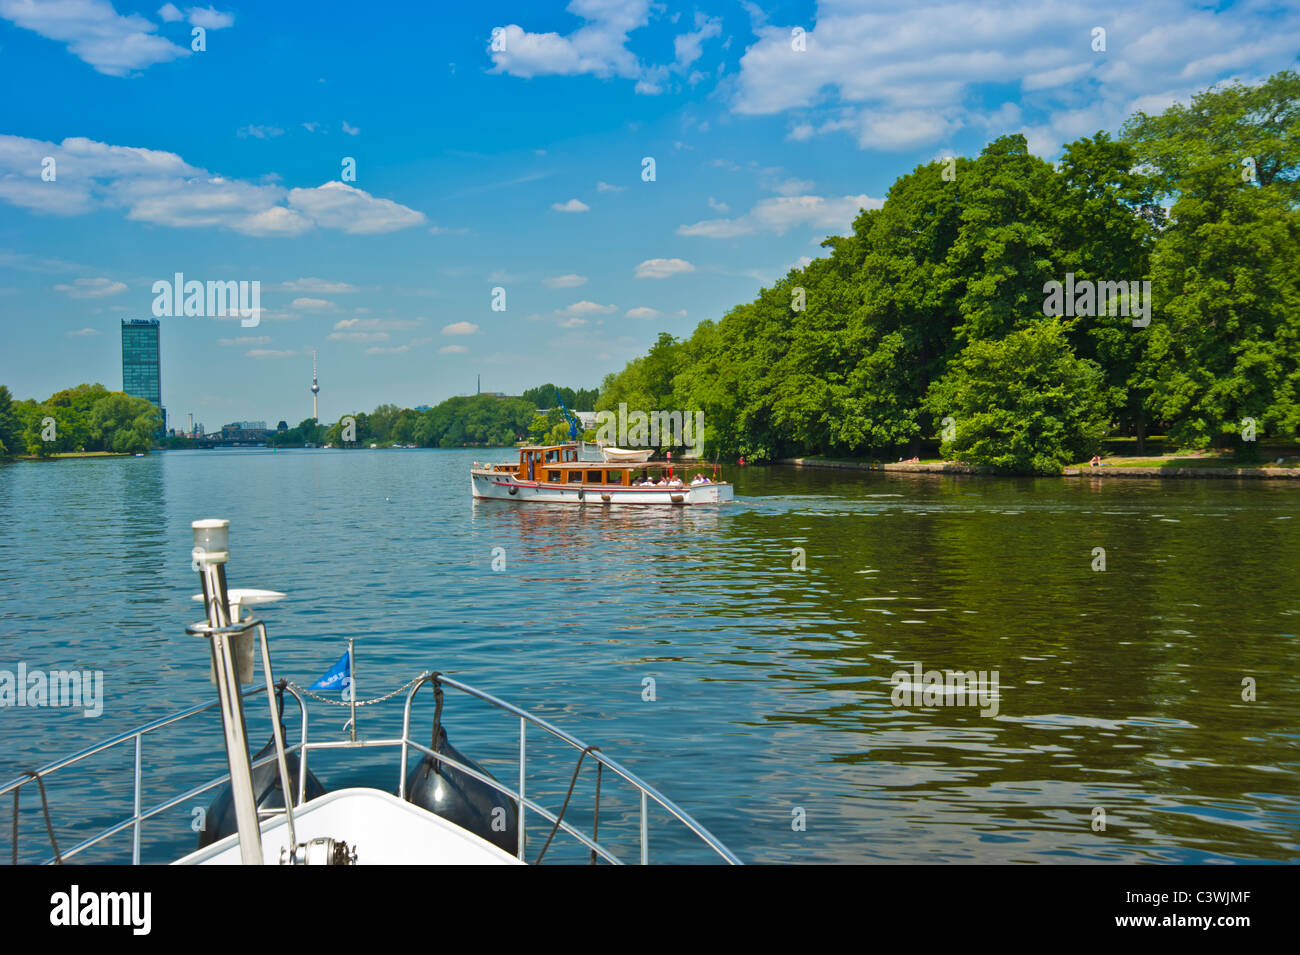 Bow of yacht and wooden tourist boat on river Spree, Berlin, Germany Stock Photo